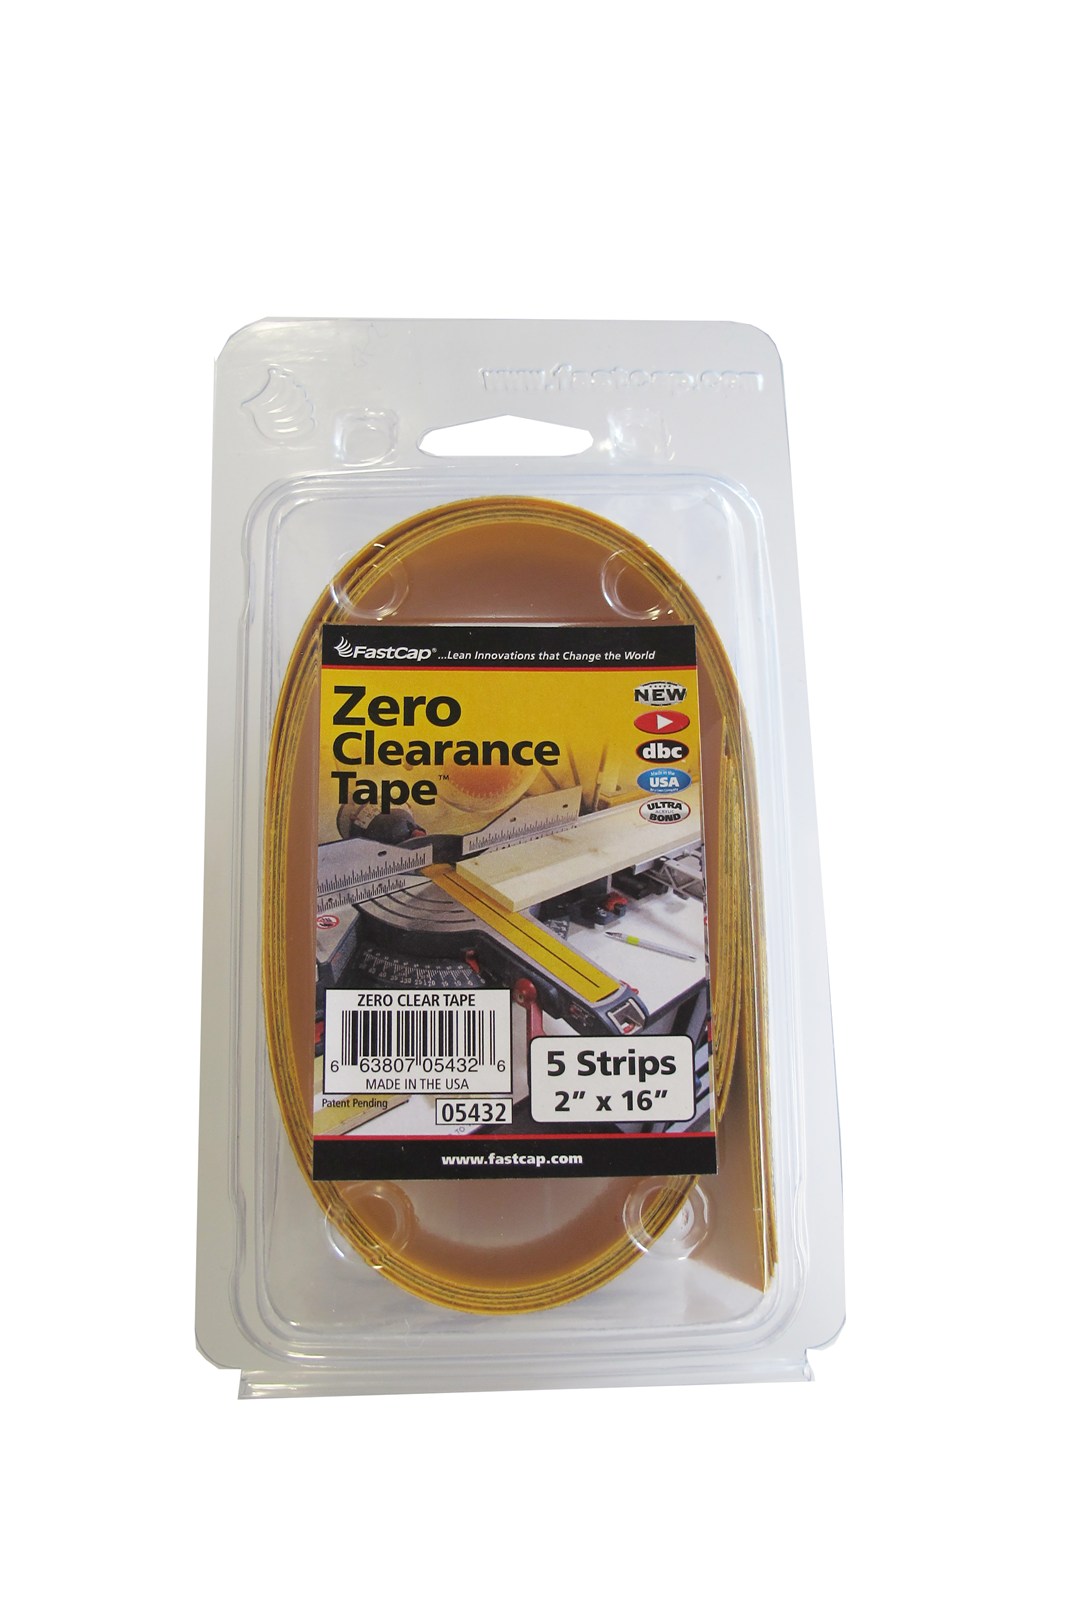 Attached FastCap Zero Clearance Tape to mitre saw : r/Tools